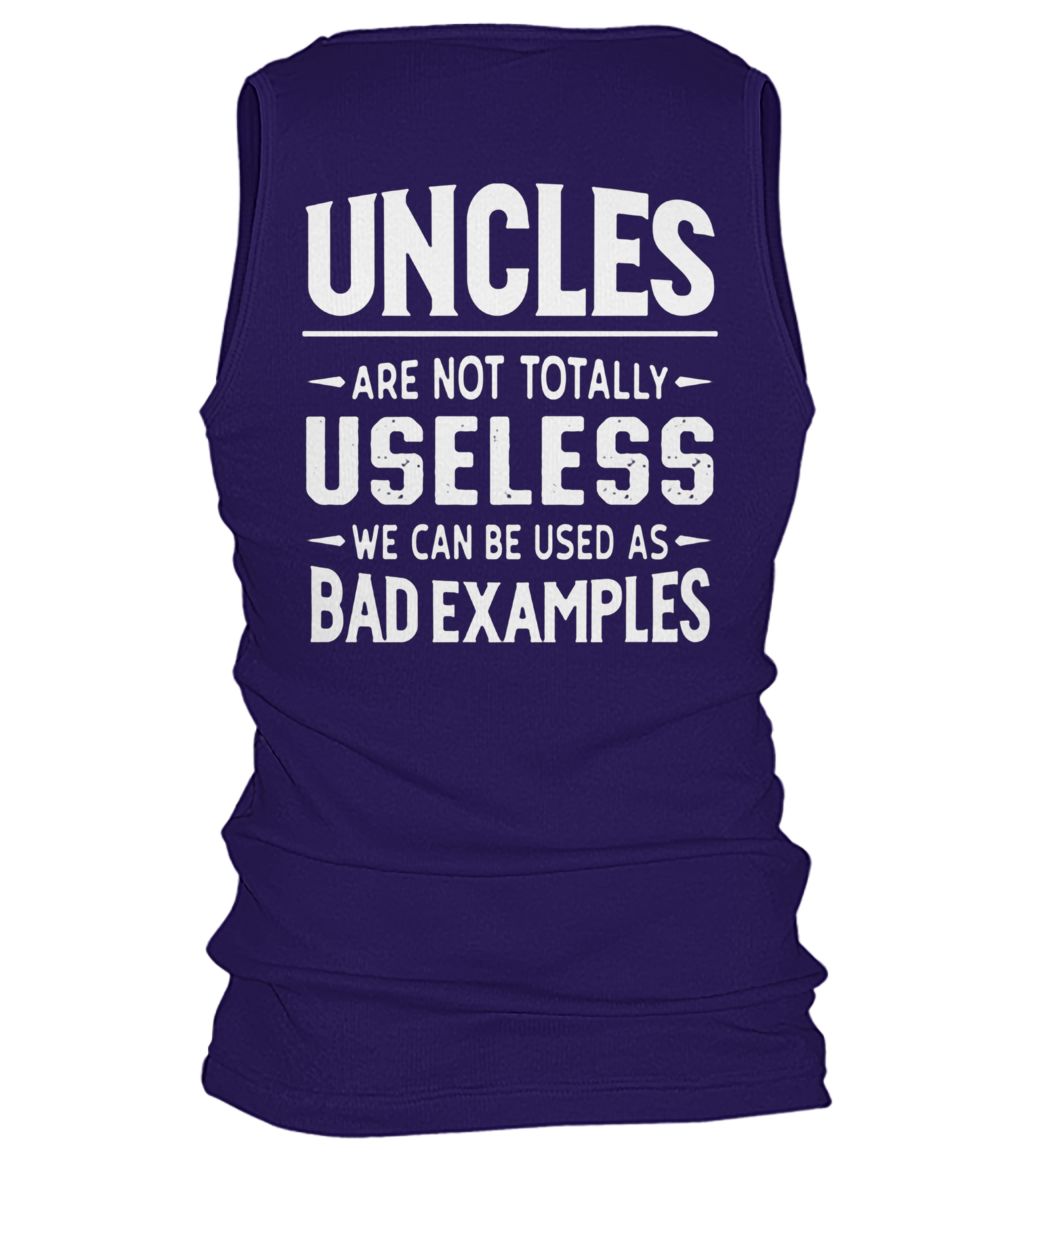 Uncles are not totally useless we can be used as bad examples men's tank top